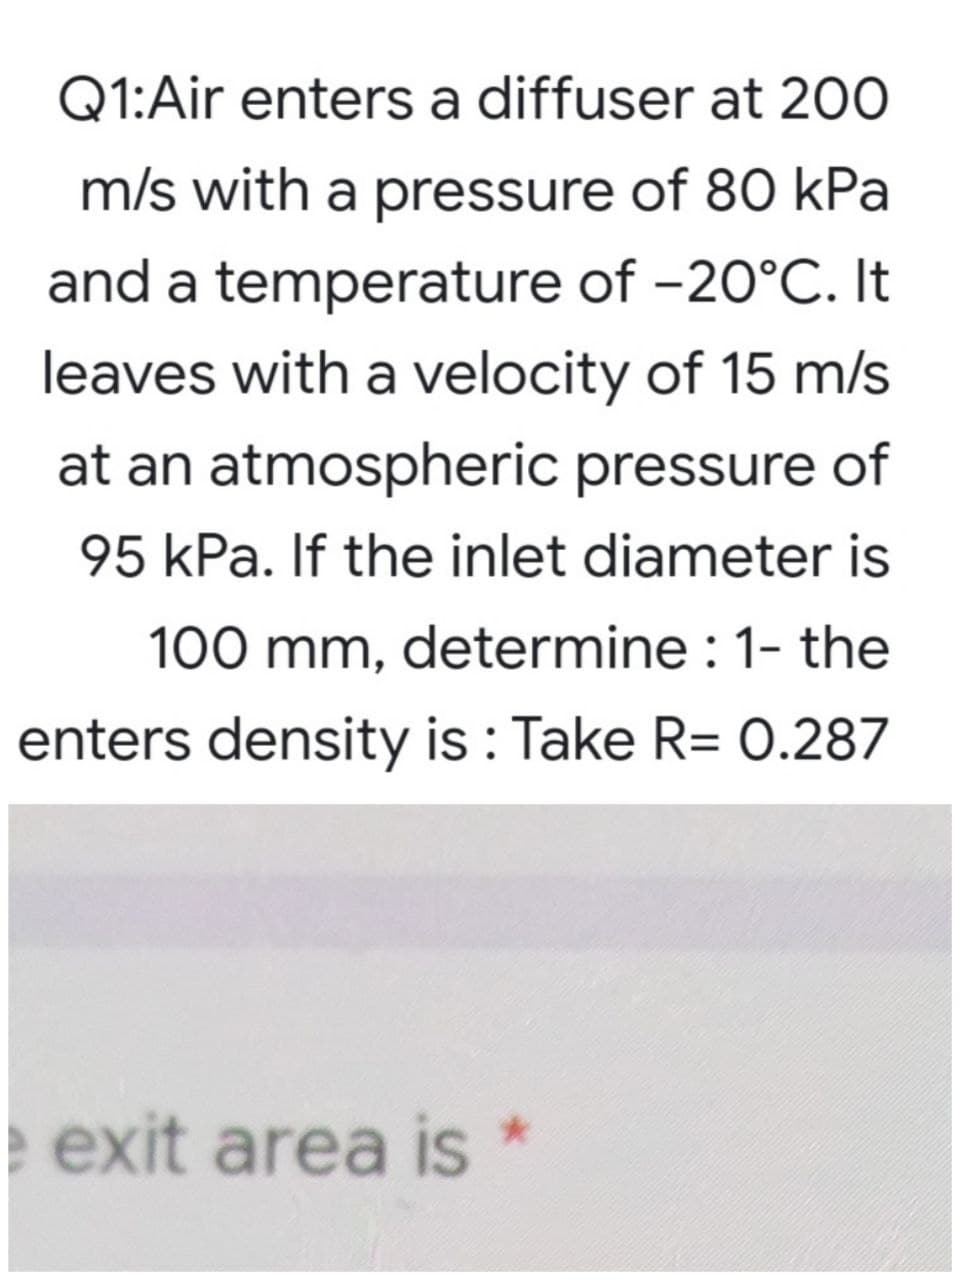 Q1:Air enters a diffuser at 200
m/s with a pressure of 80 kPa
and a temperature of -20°C. It
leaves with a velocity of 15 m/s
at an atmospheric pressure of
95 kPa. If the inlet diameter is
100 mm, determine : 1- the
enters density is : Take R= 0.287
e exit area is *
